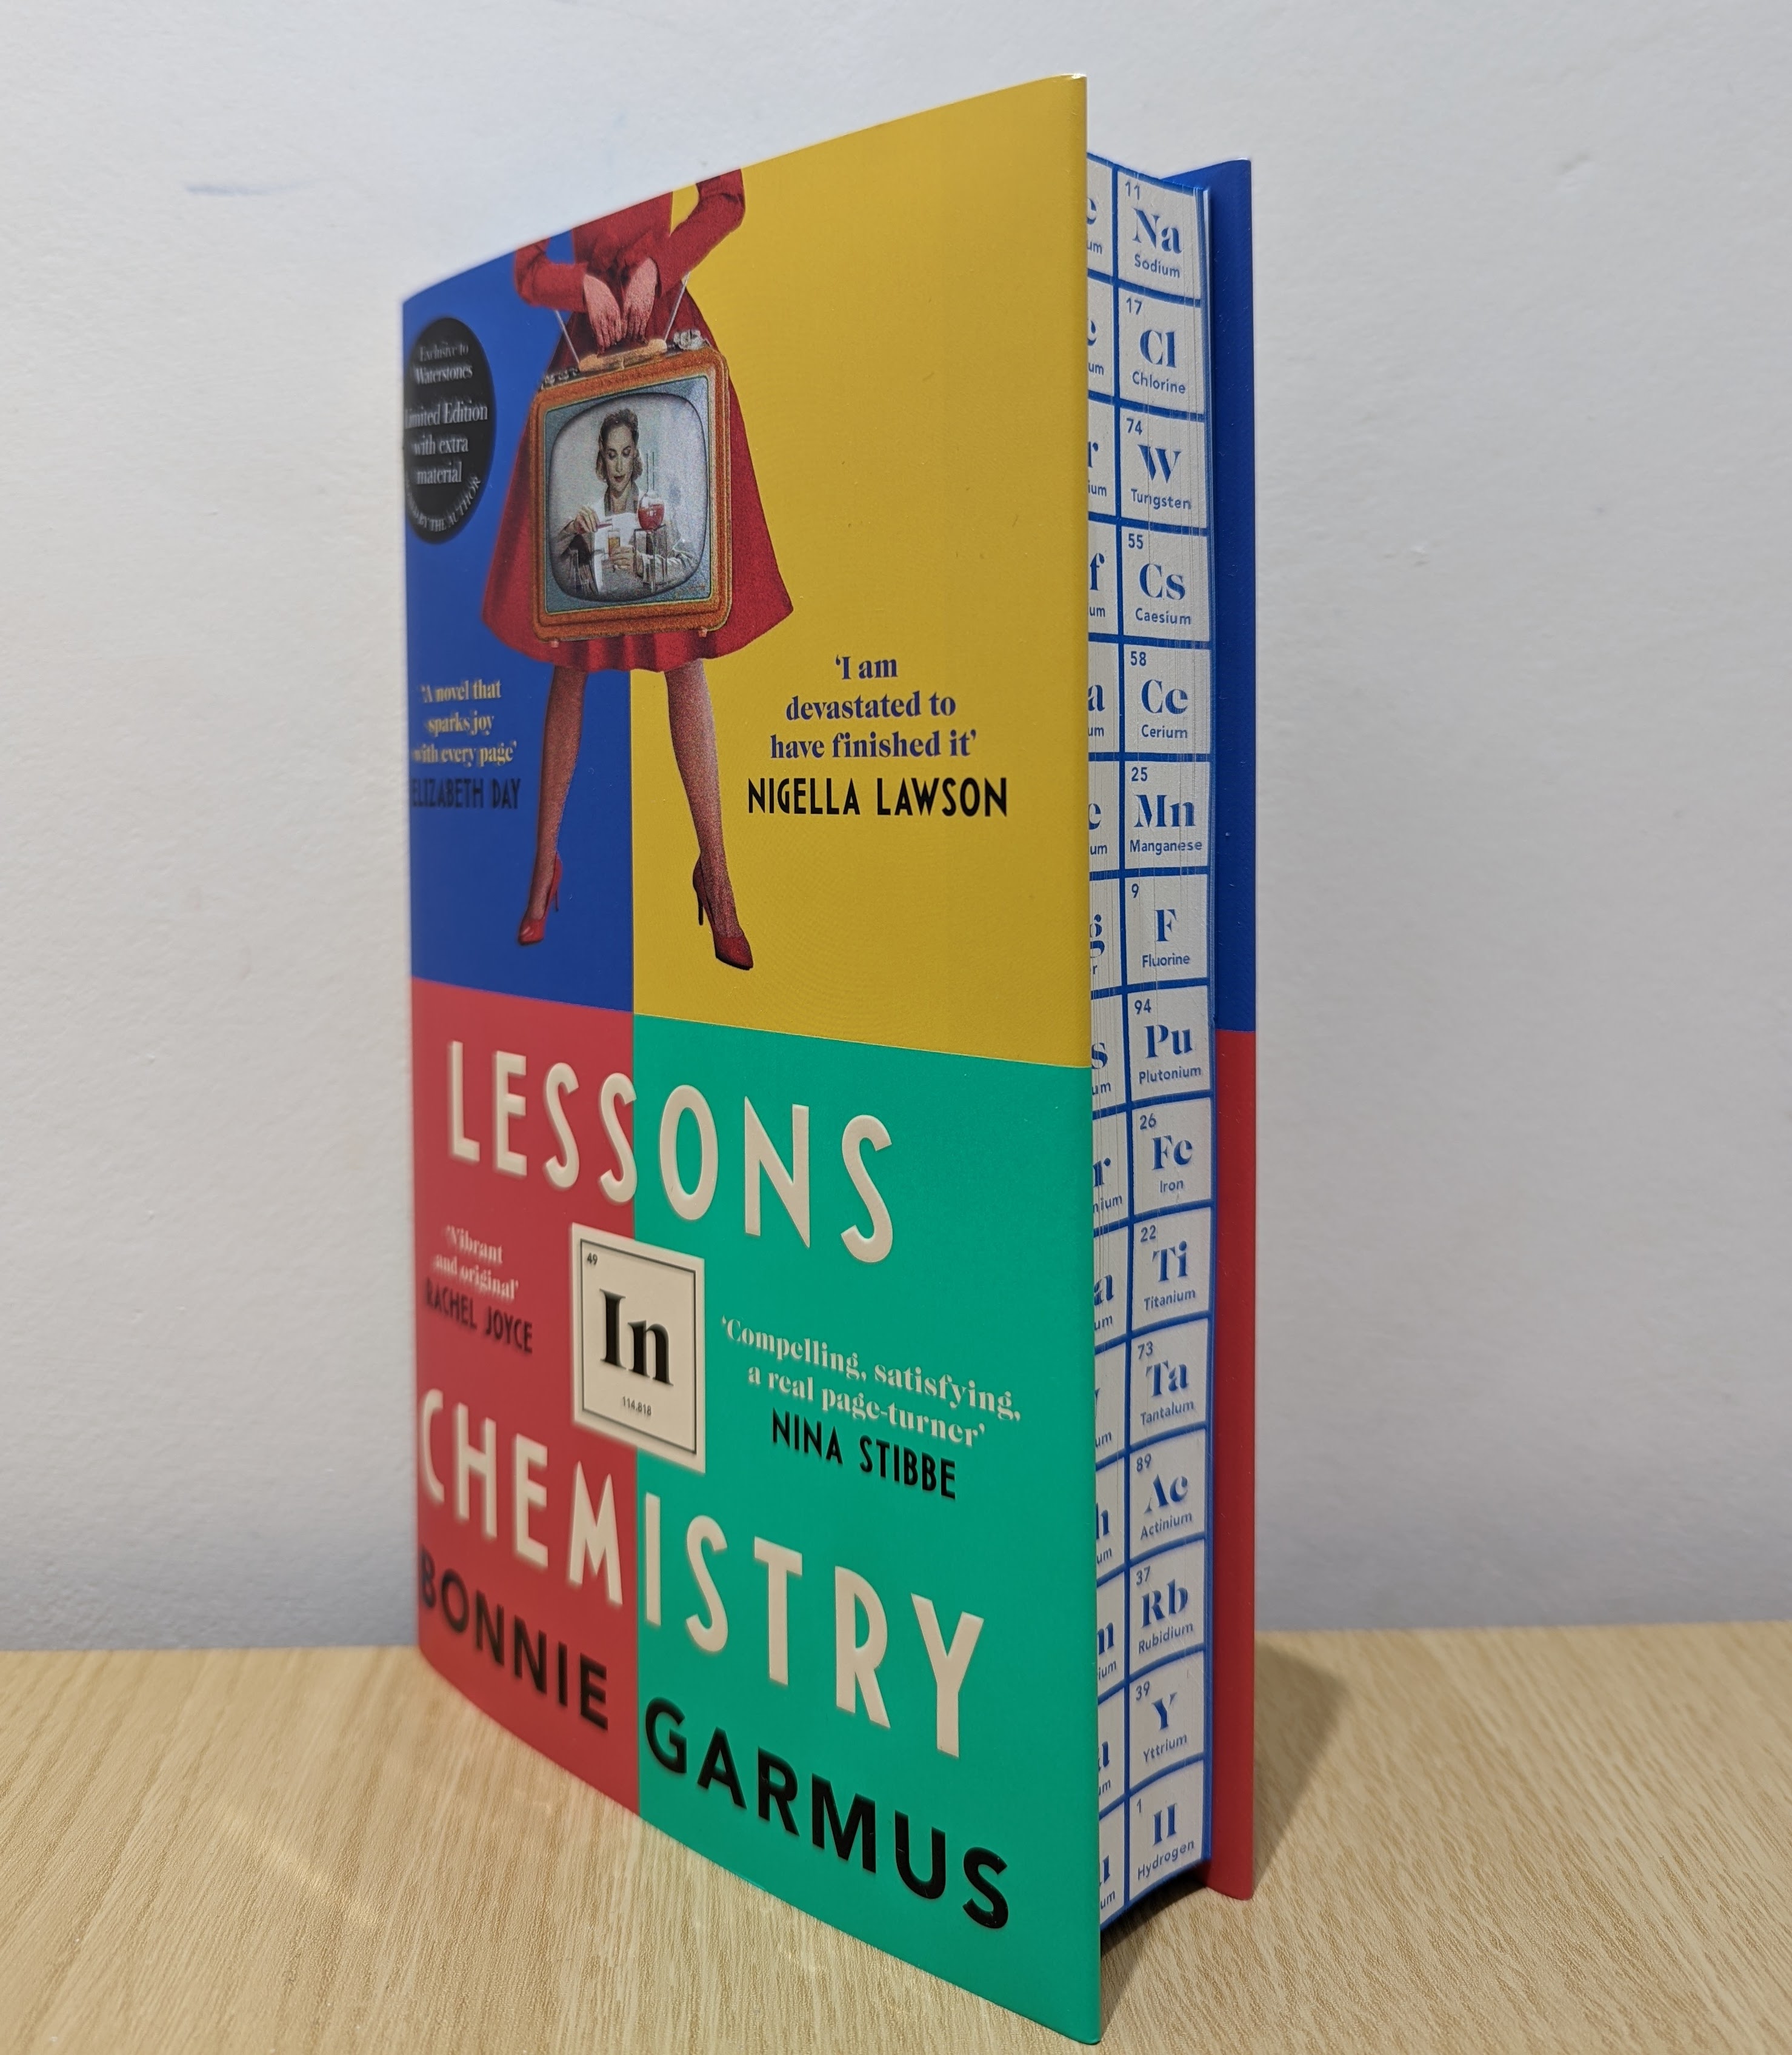 nyt book review of lessons in chemistry